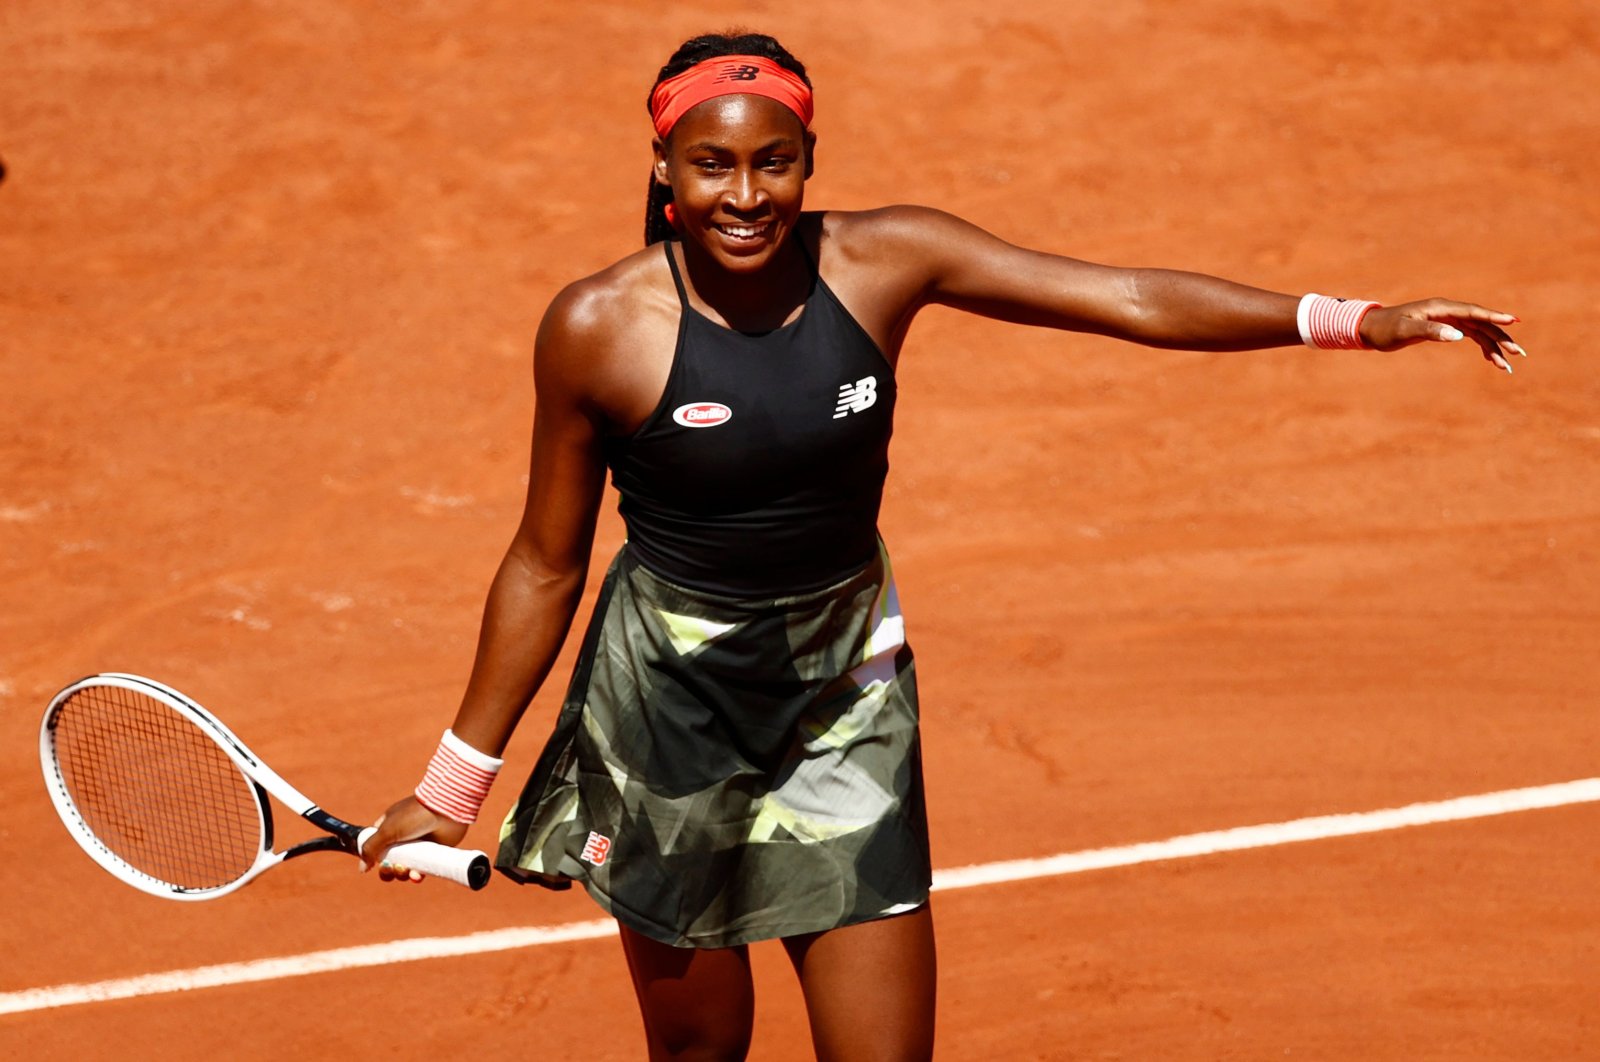 U.S. teenage tennis sensation Coco Gauff celebrates after winning her French Open fourth-round match against Tunisia's Ons Jabeur, at the Roland Garros, Paris, France, June 7, 2021. (Reuters Photo)